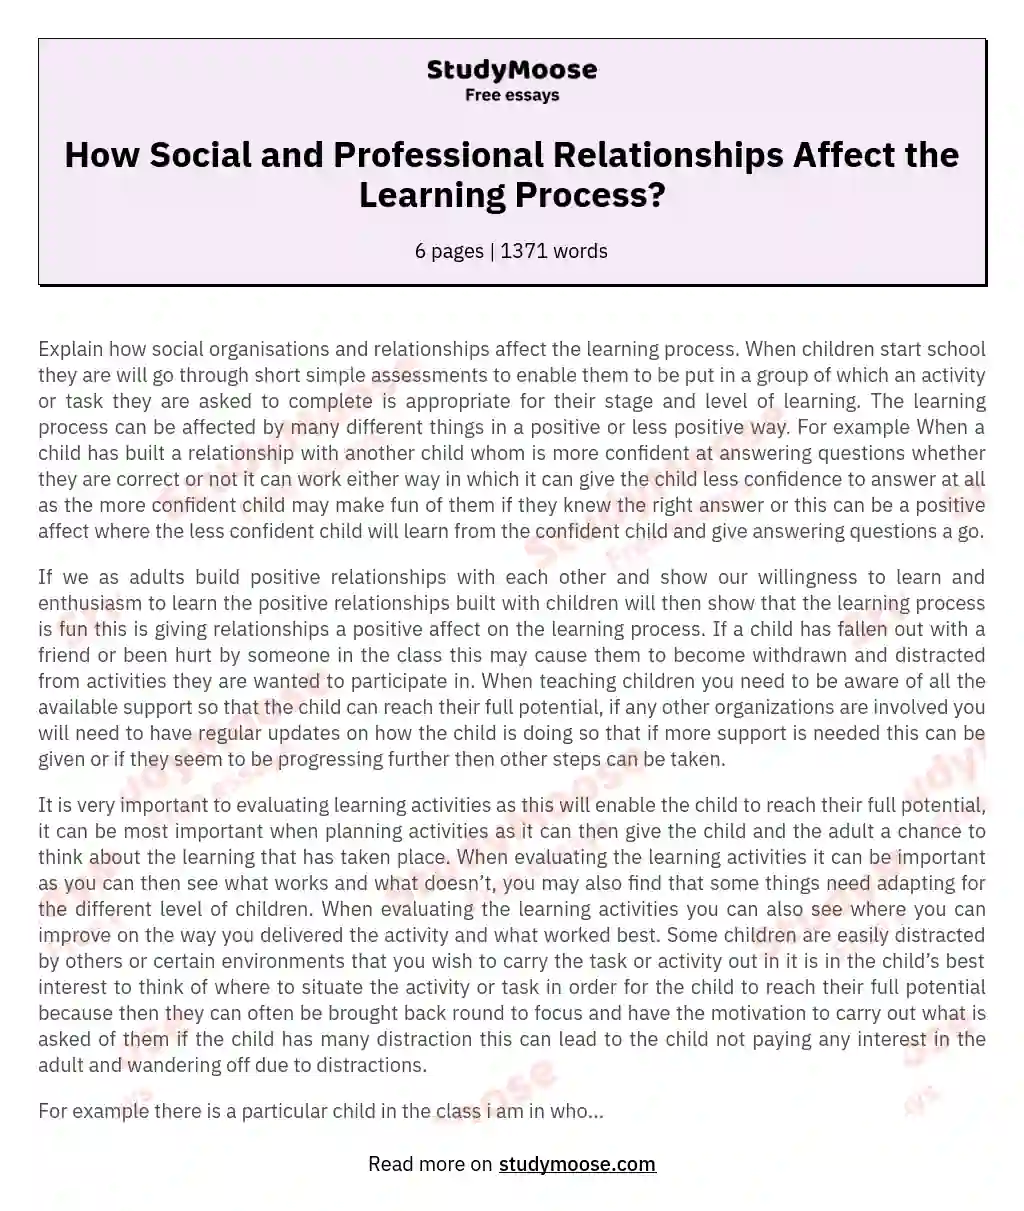 How Social and Professional Relationships Affect the Learning Process? essay